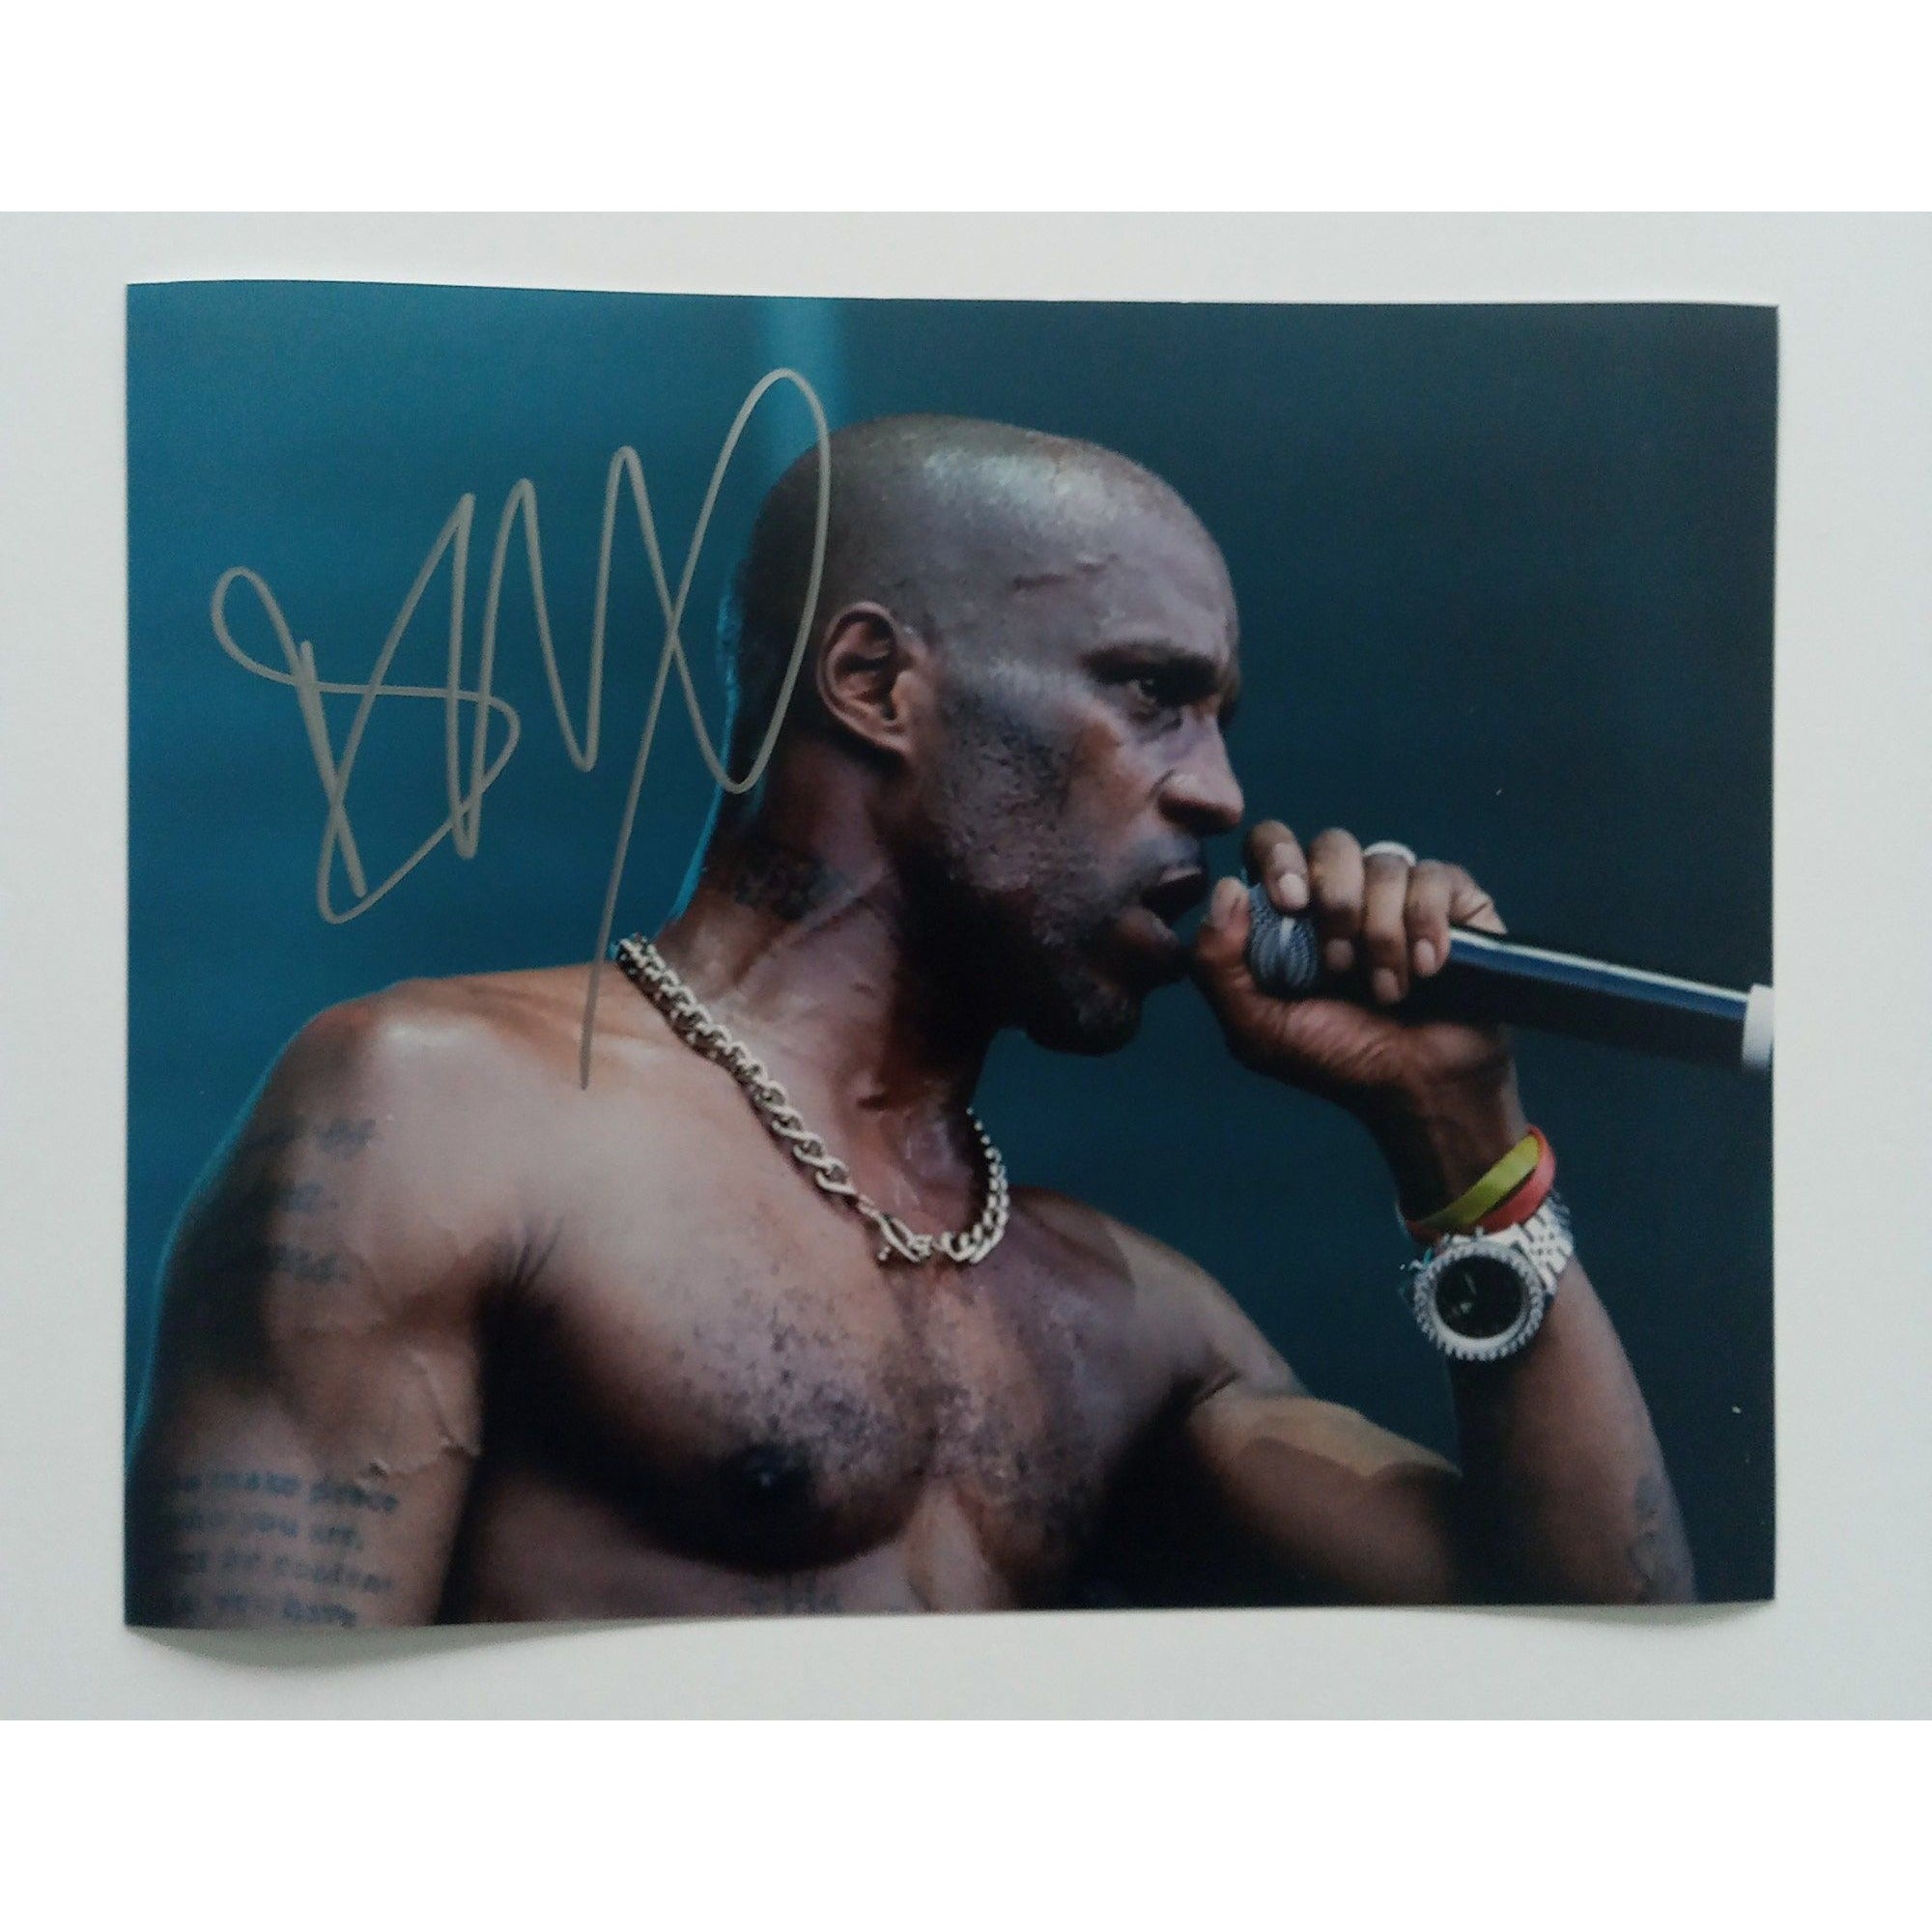 Earl Simmons "DMX" 8x10 signed photo with proof